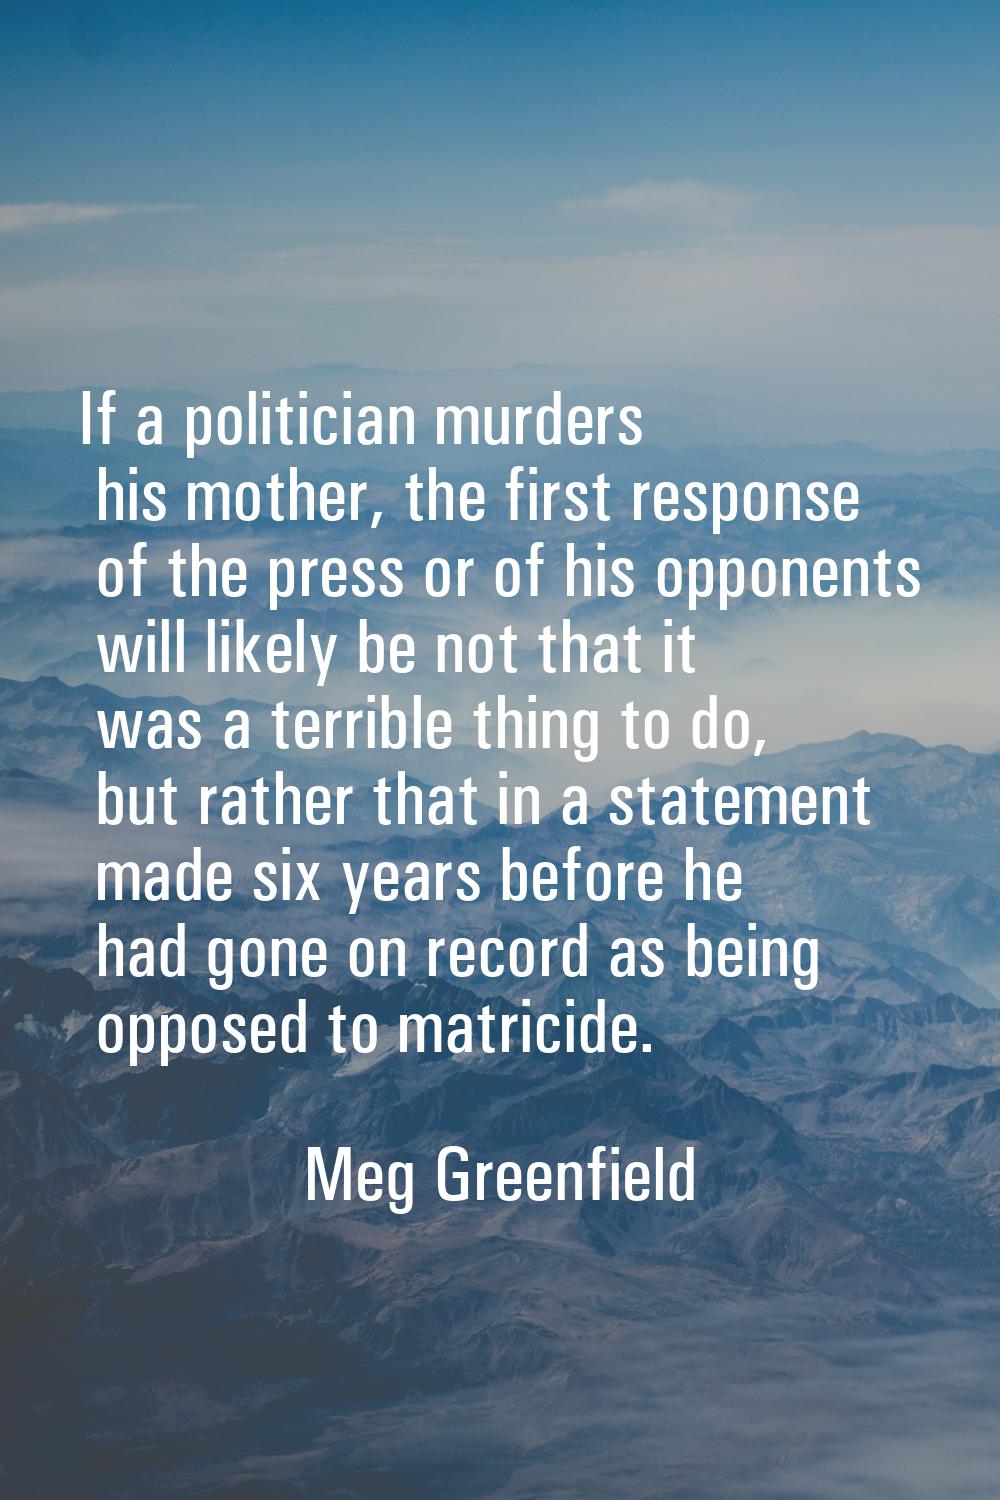 If a politician murders his mother, the first response of the press or of his opponents will likely